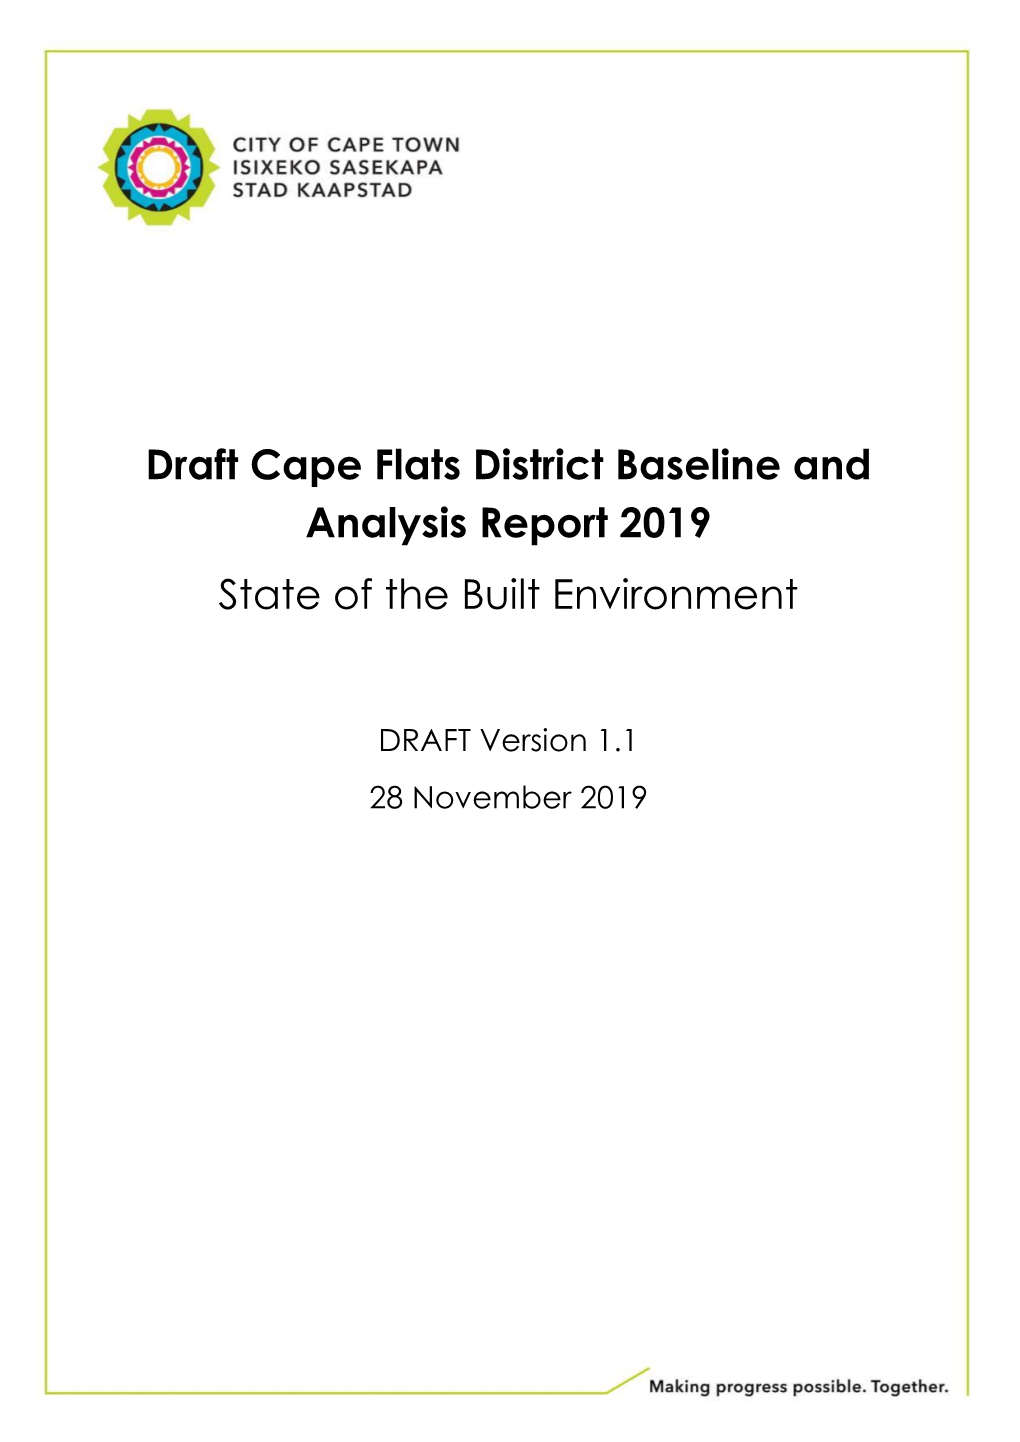 Draft Cape Flats District Baseline and Analysis Report 2019 State of the Built Environment